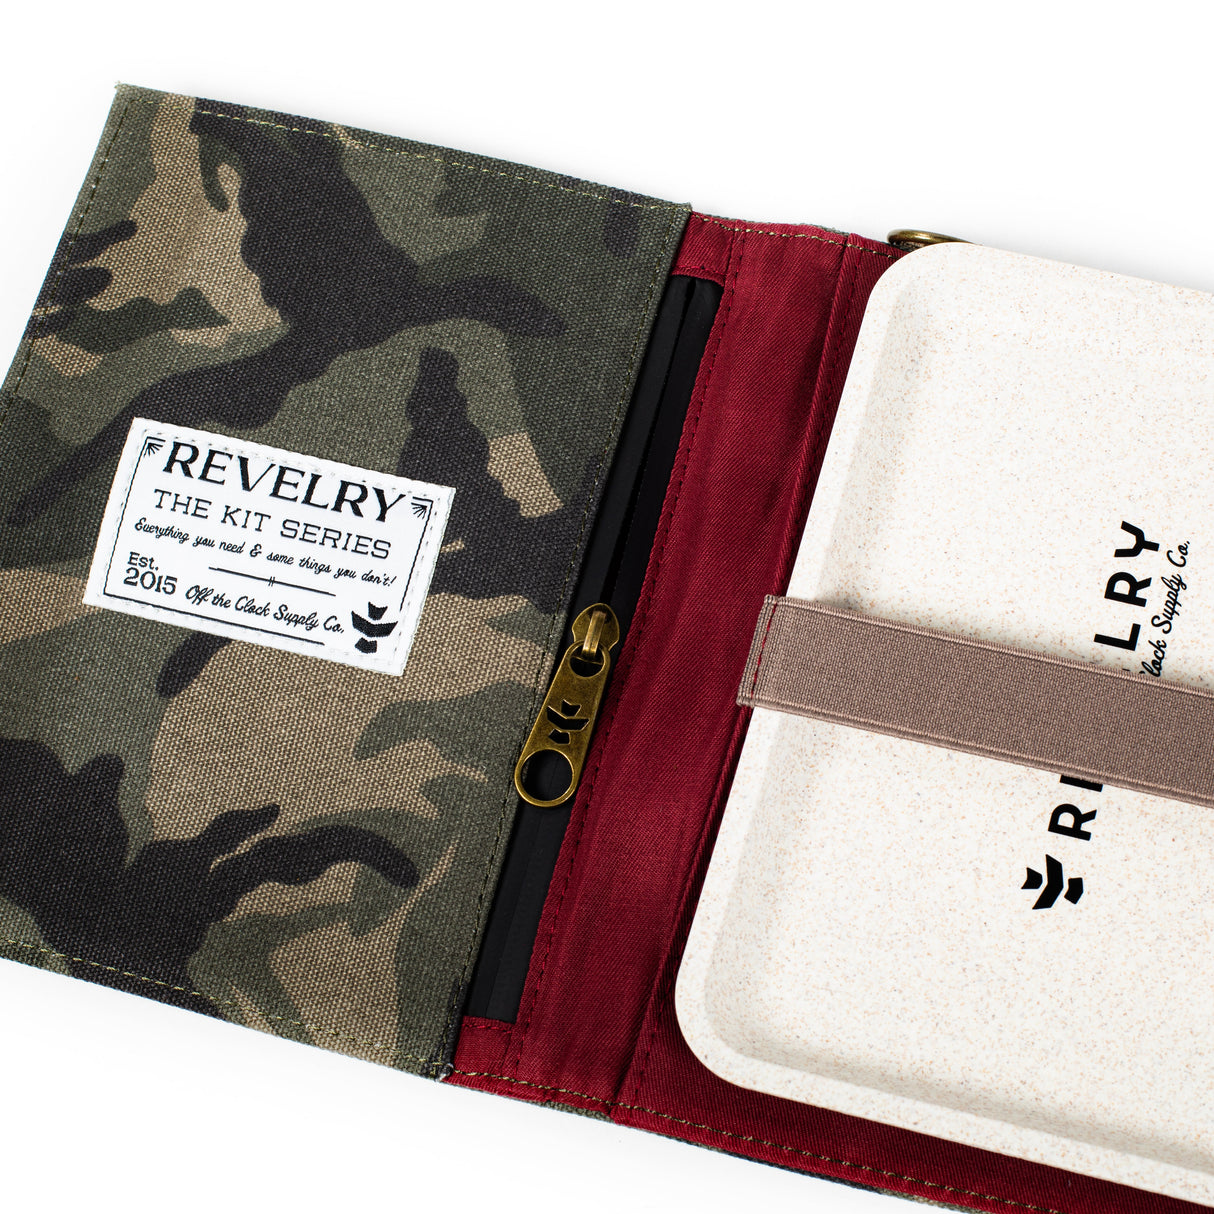 Revelry Supply The Rolling Kit open view showing compartments and smell-proof material